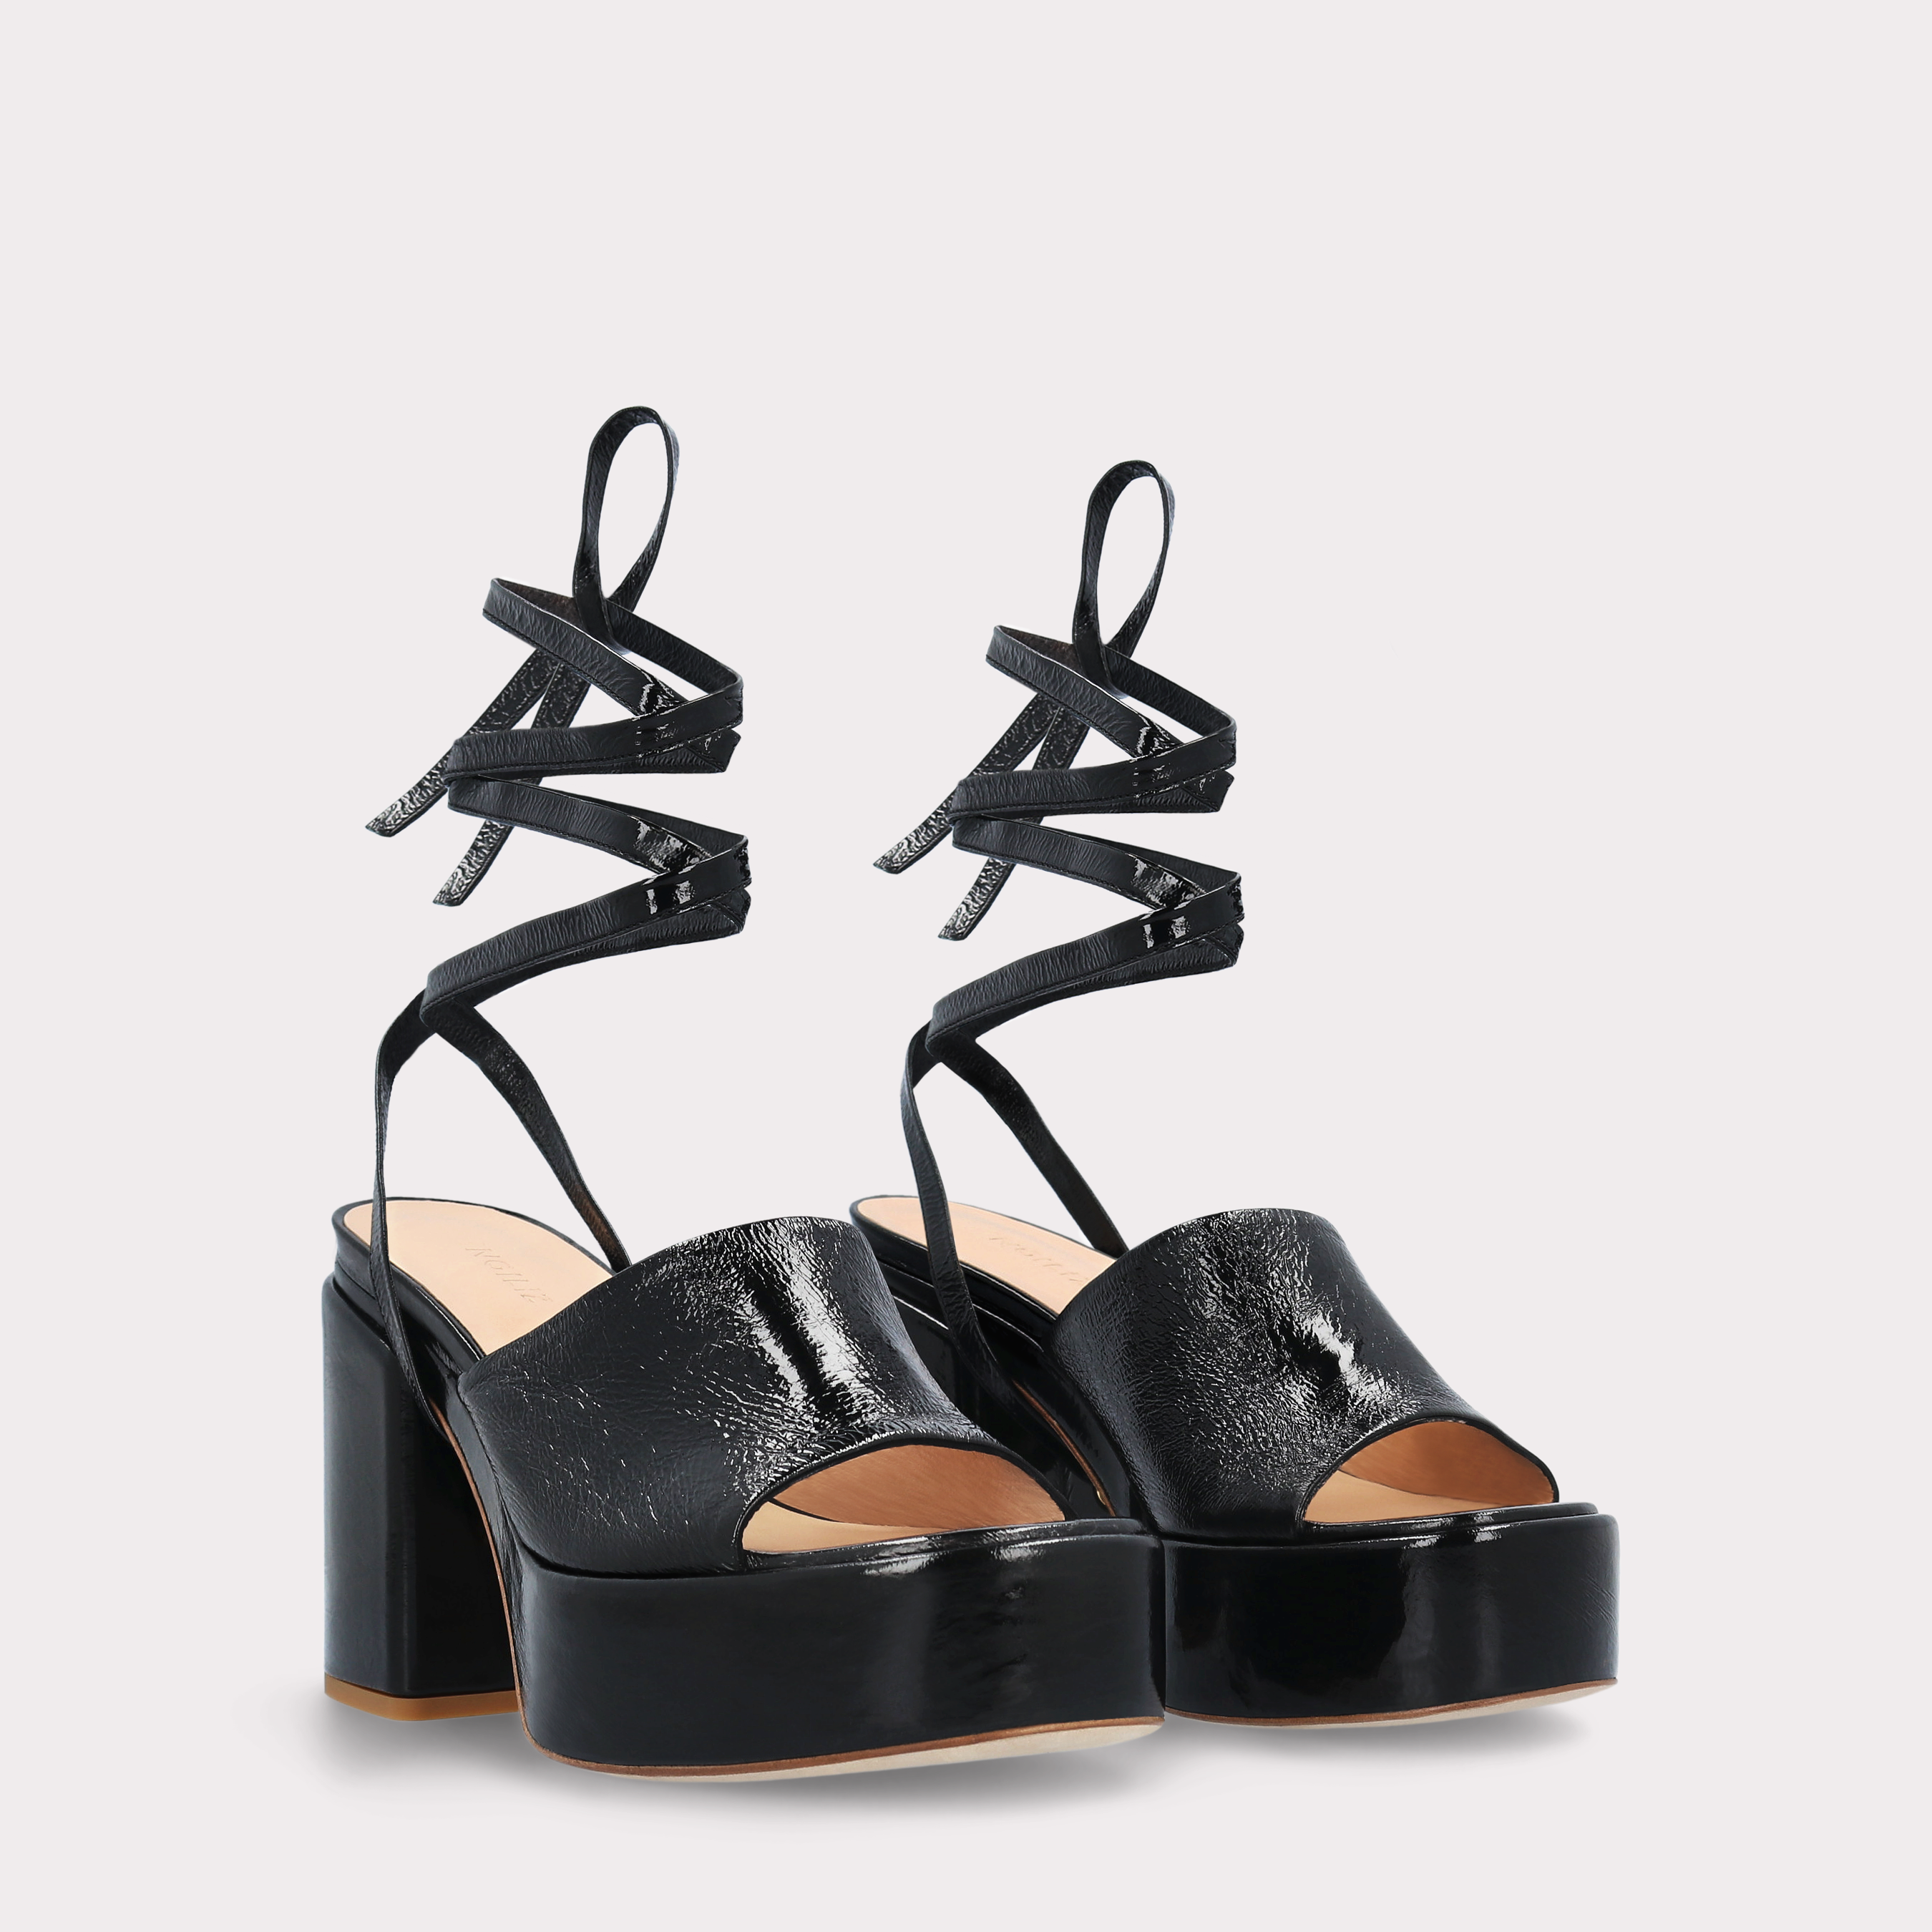 AKAADA 02 BLACK CRUSHED PATENT LEATHER SANDALS